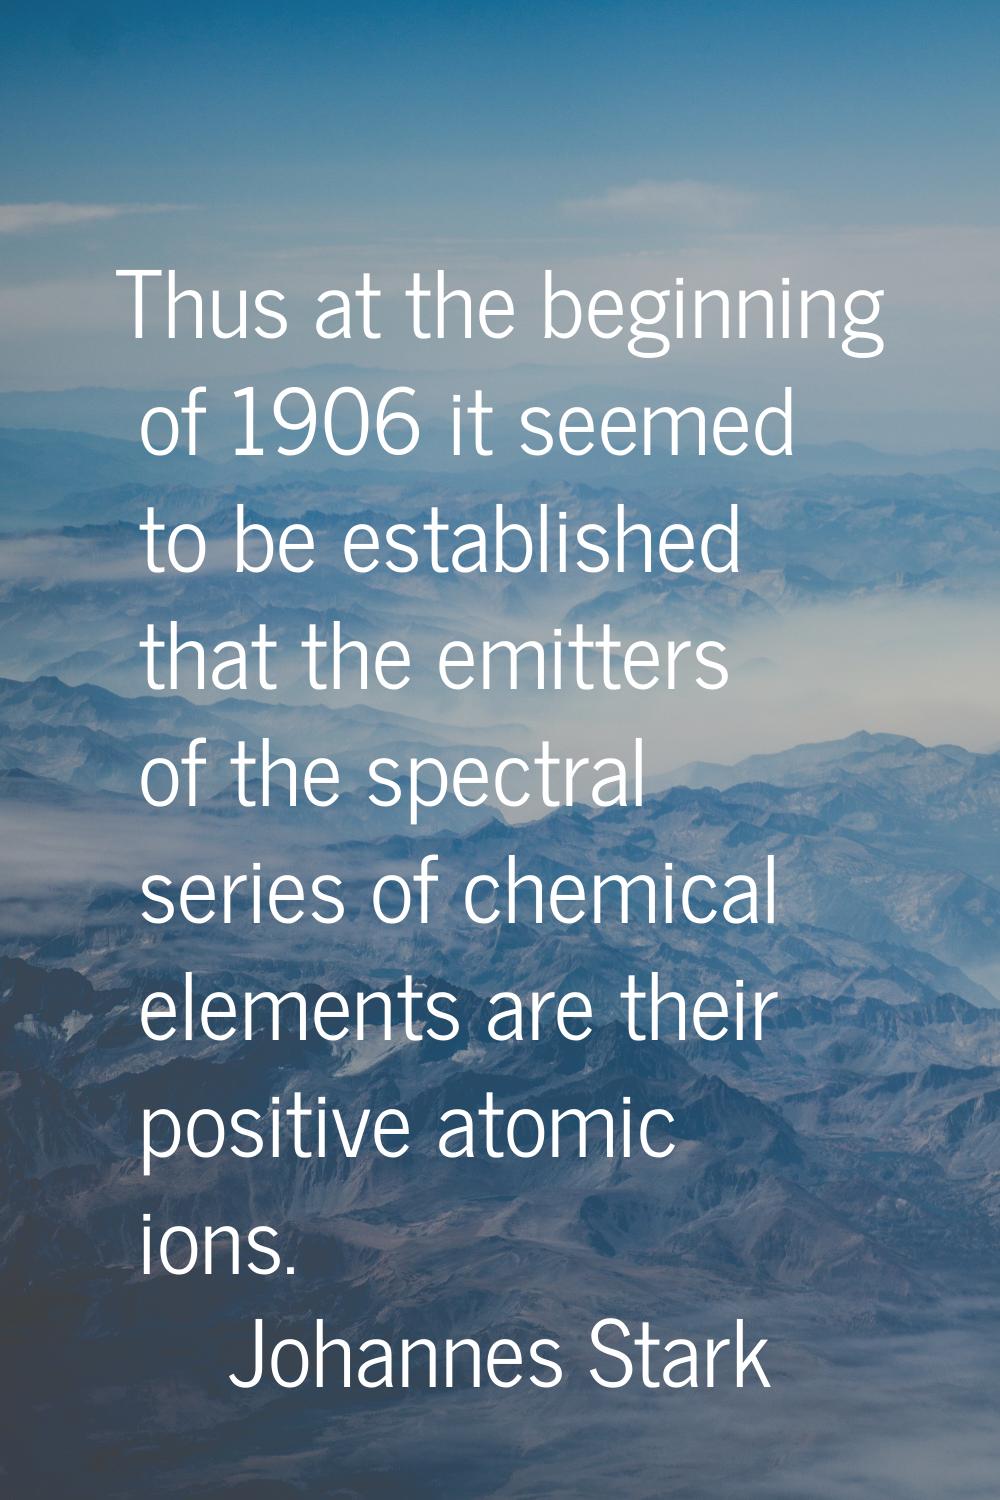 Thus at the beginning of 1906 it seemed to be established that the emitters of the spectral series 